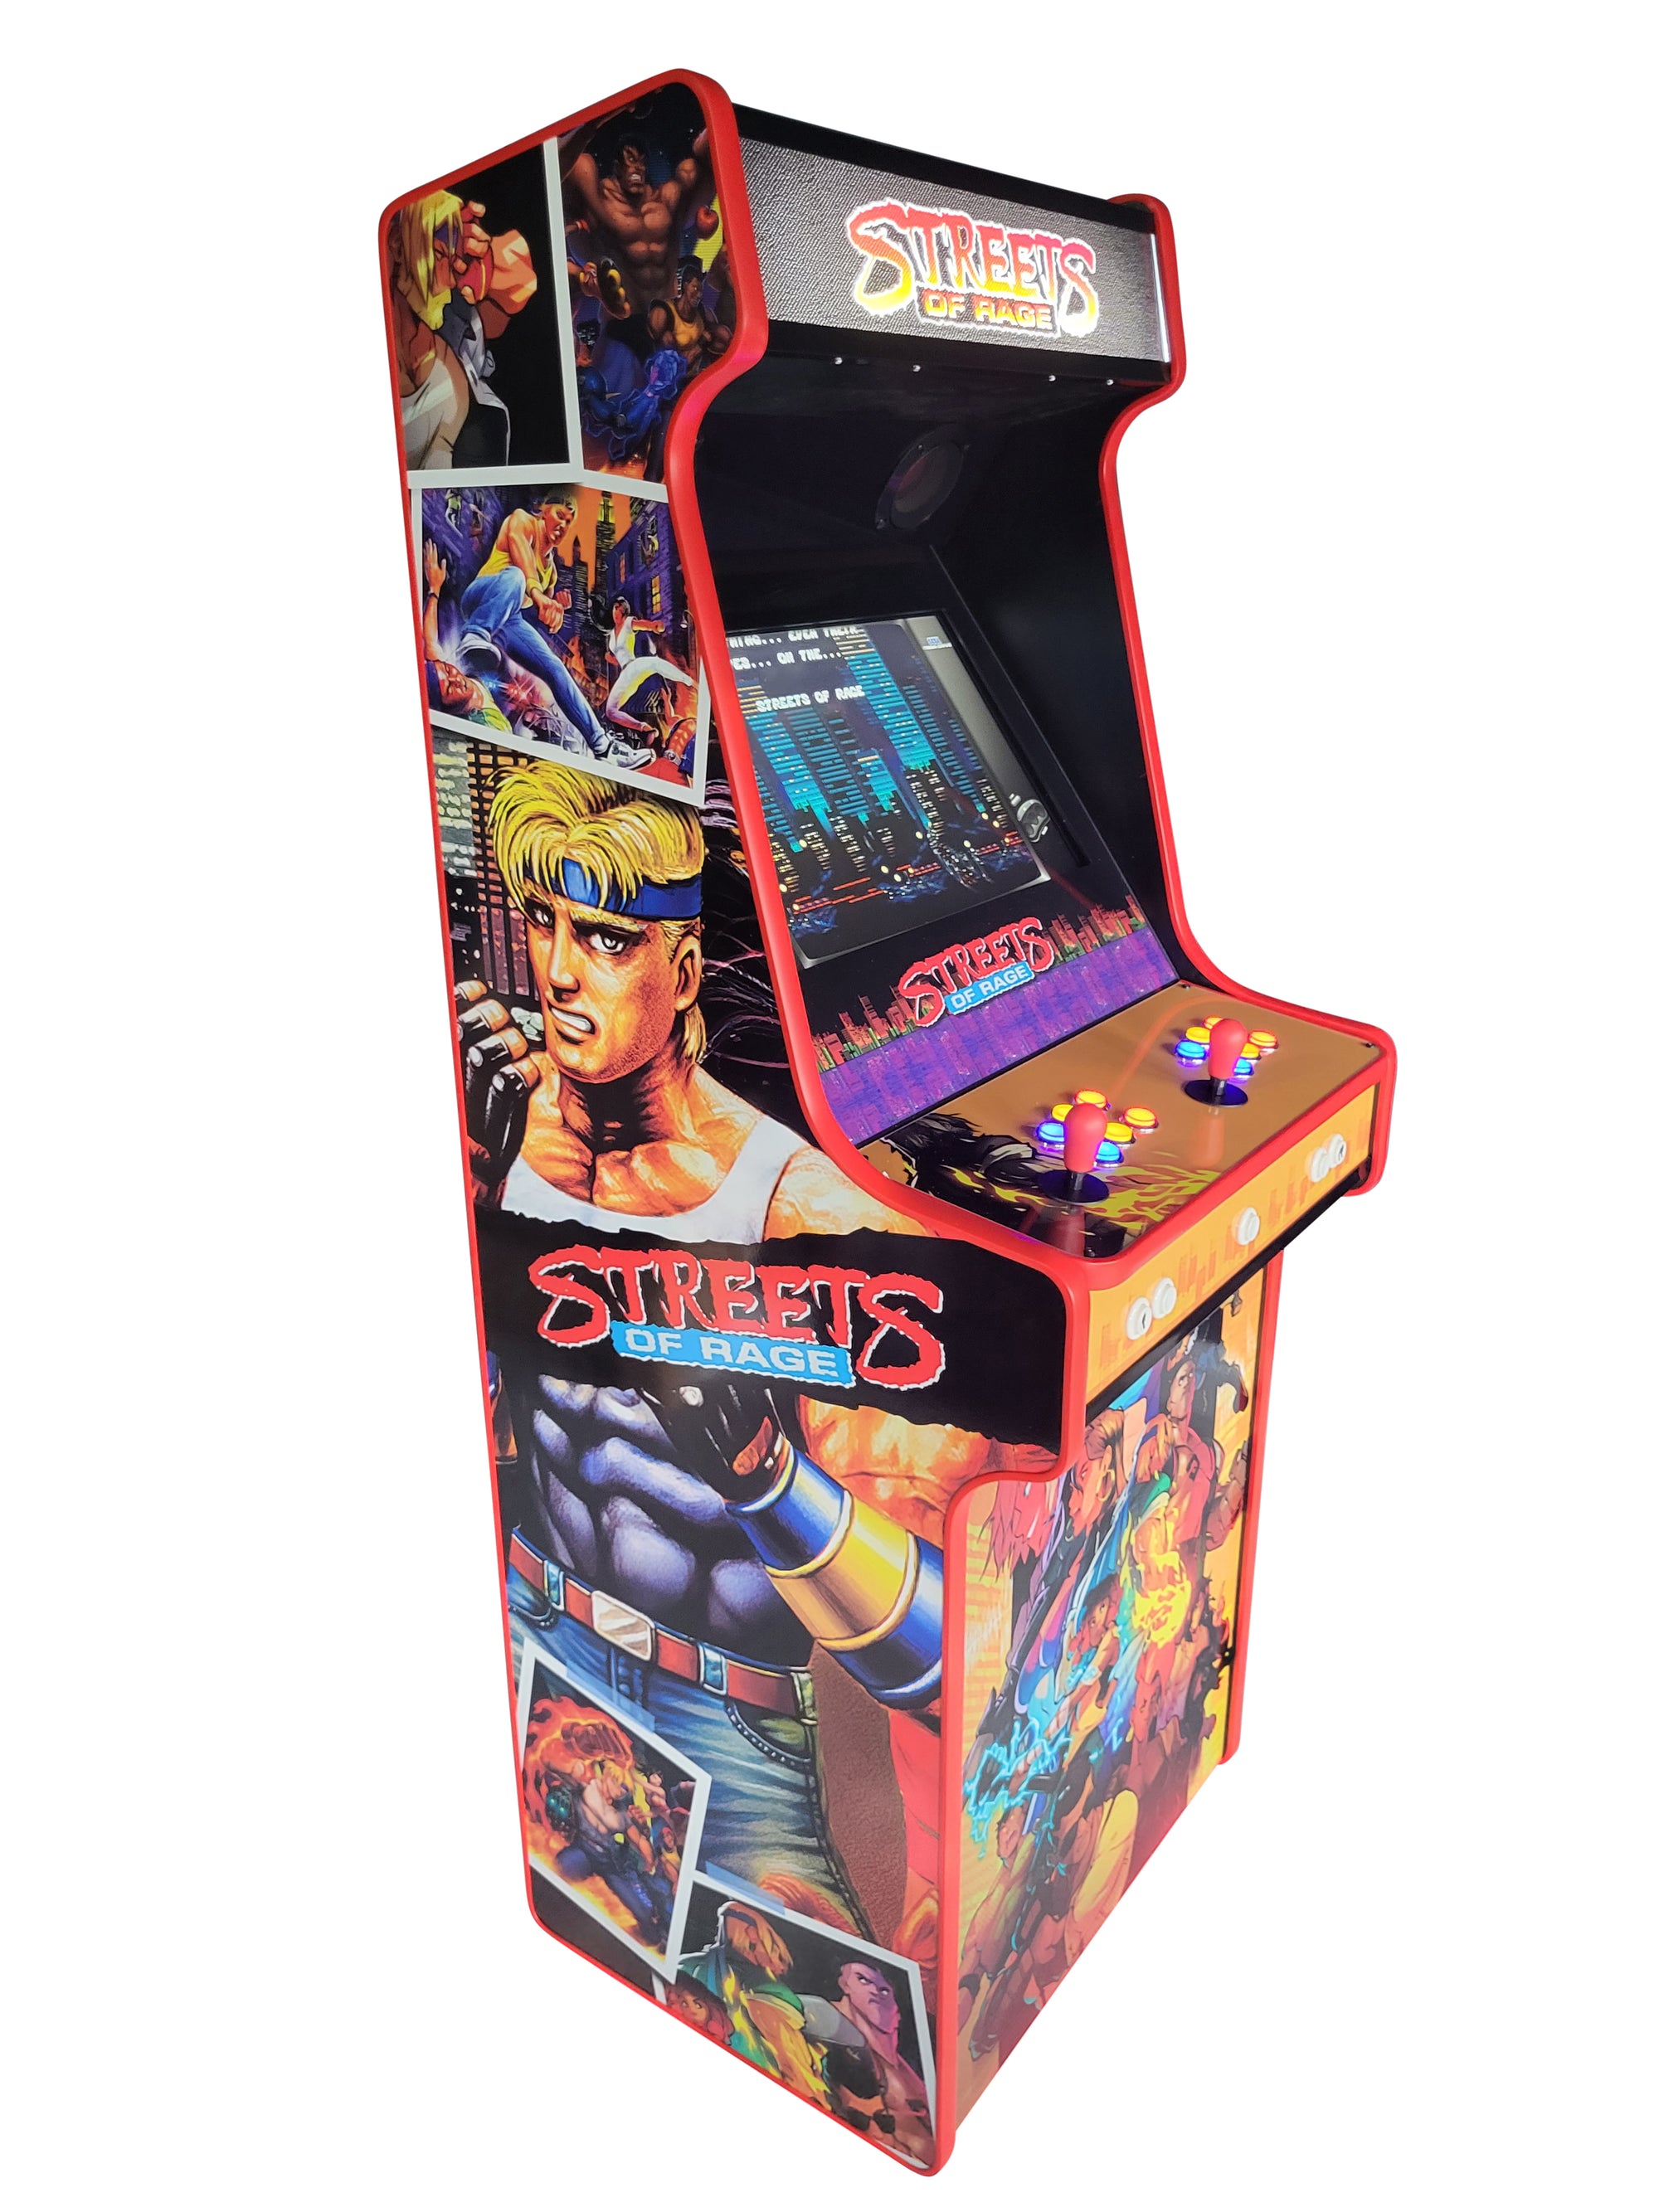 Streets of Rage style arcade machine with 15,000 games.